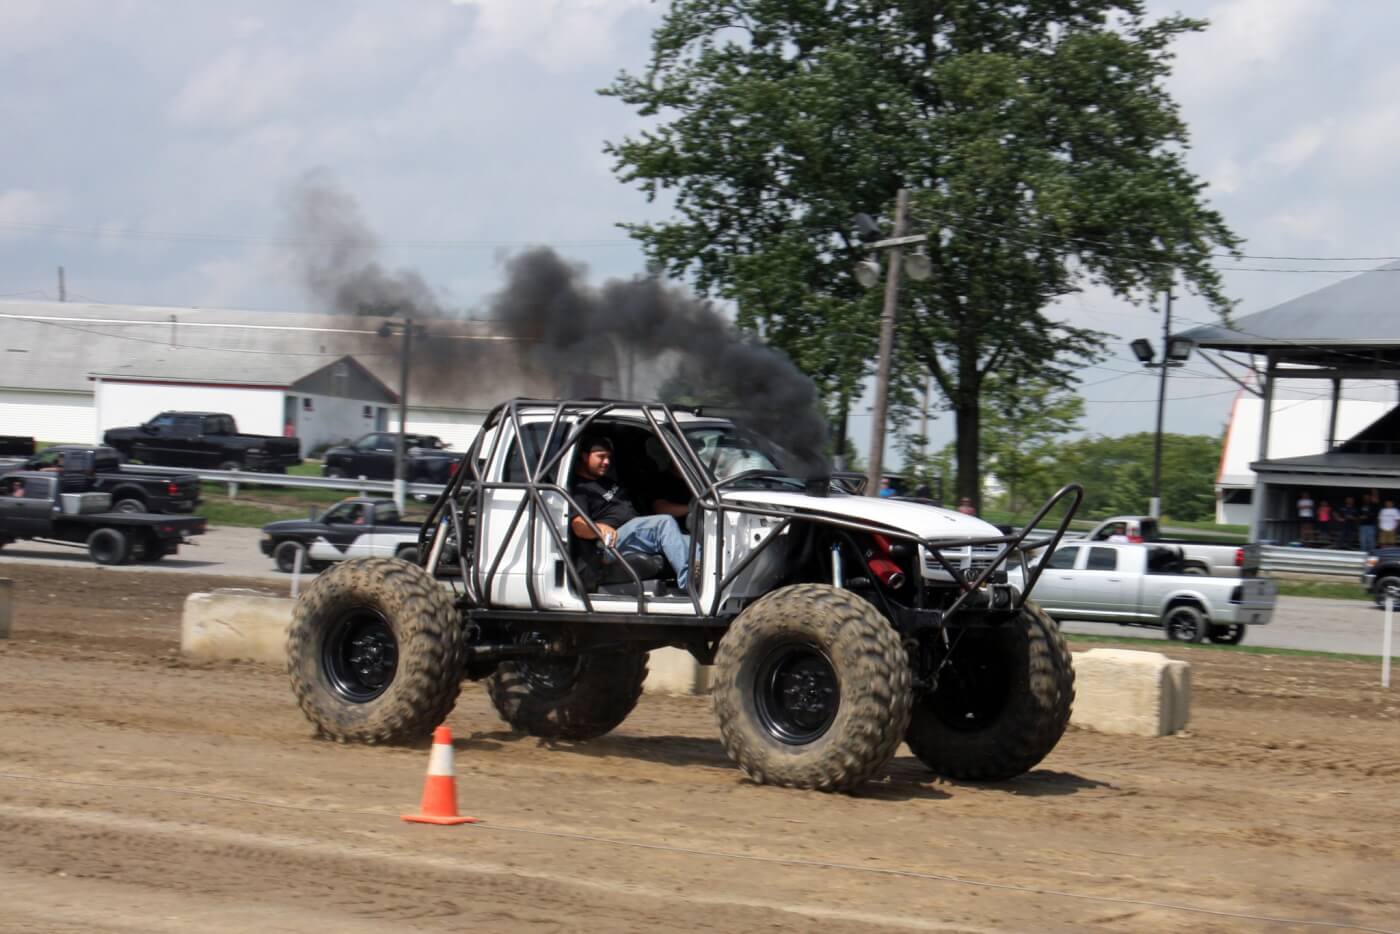 This diesel-powered Dodge rock buggy may not have been the fastest truck on the track but it sure was one of the most unique with its exo-cage and massive Rockwell axles.